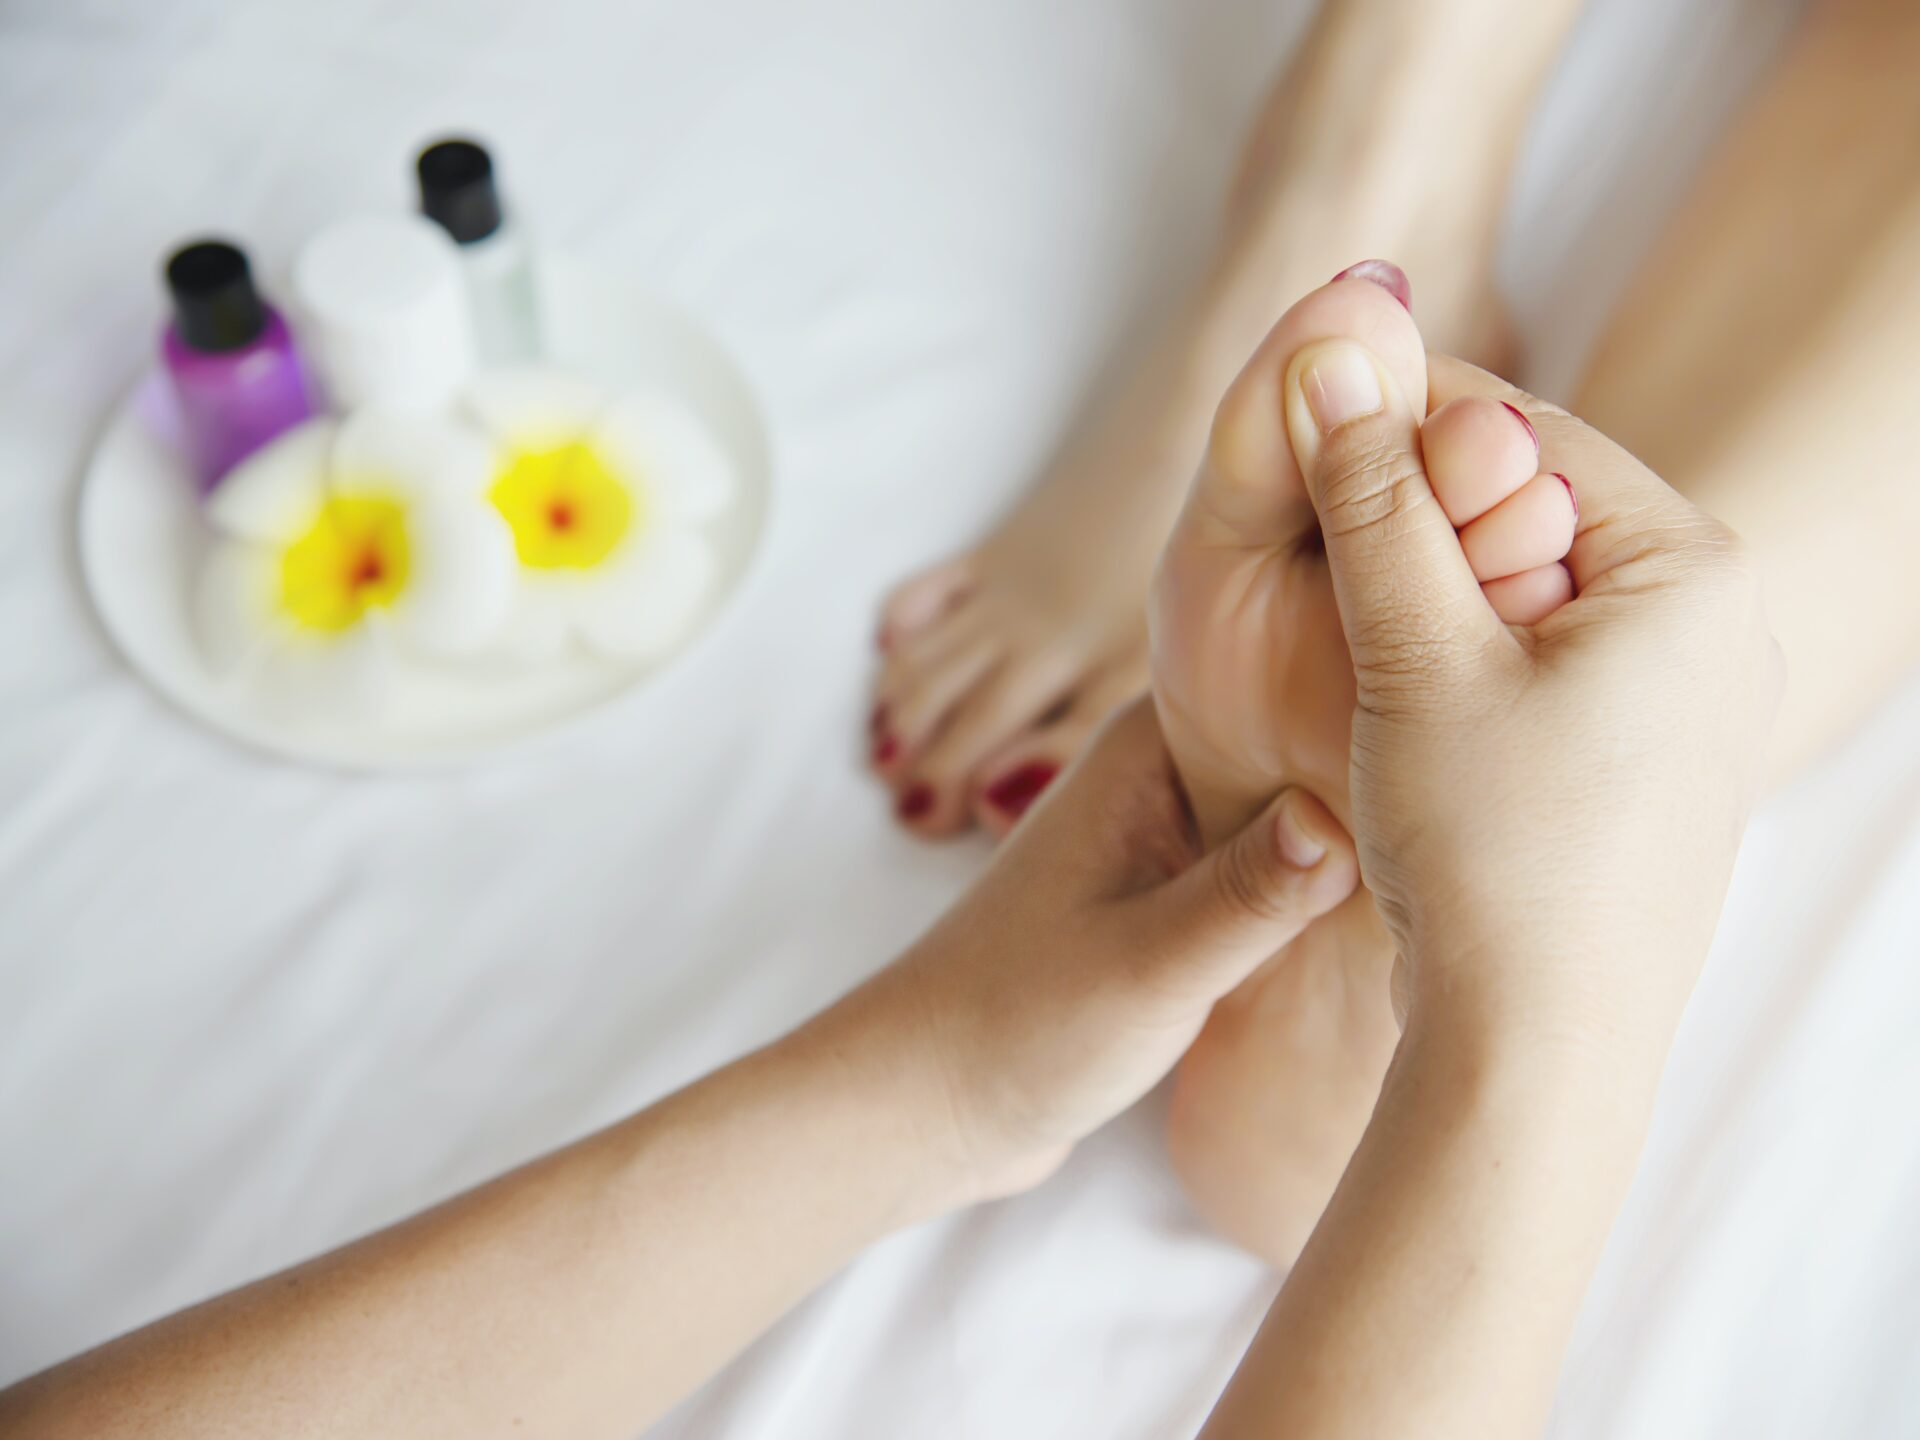 woman-receiving-foot-massage-service-from-masseuse-close-up-hand-foot-relax-foot-massage-therapy-service-concept